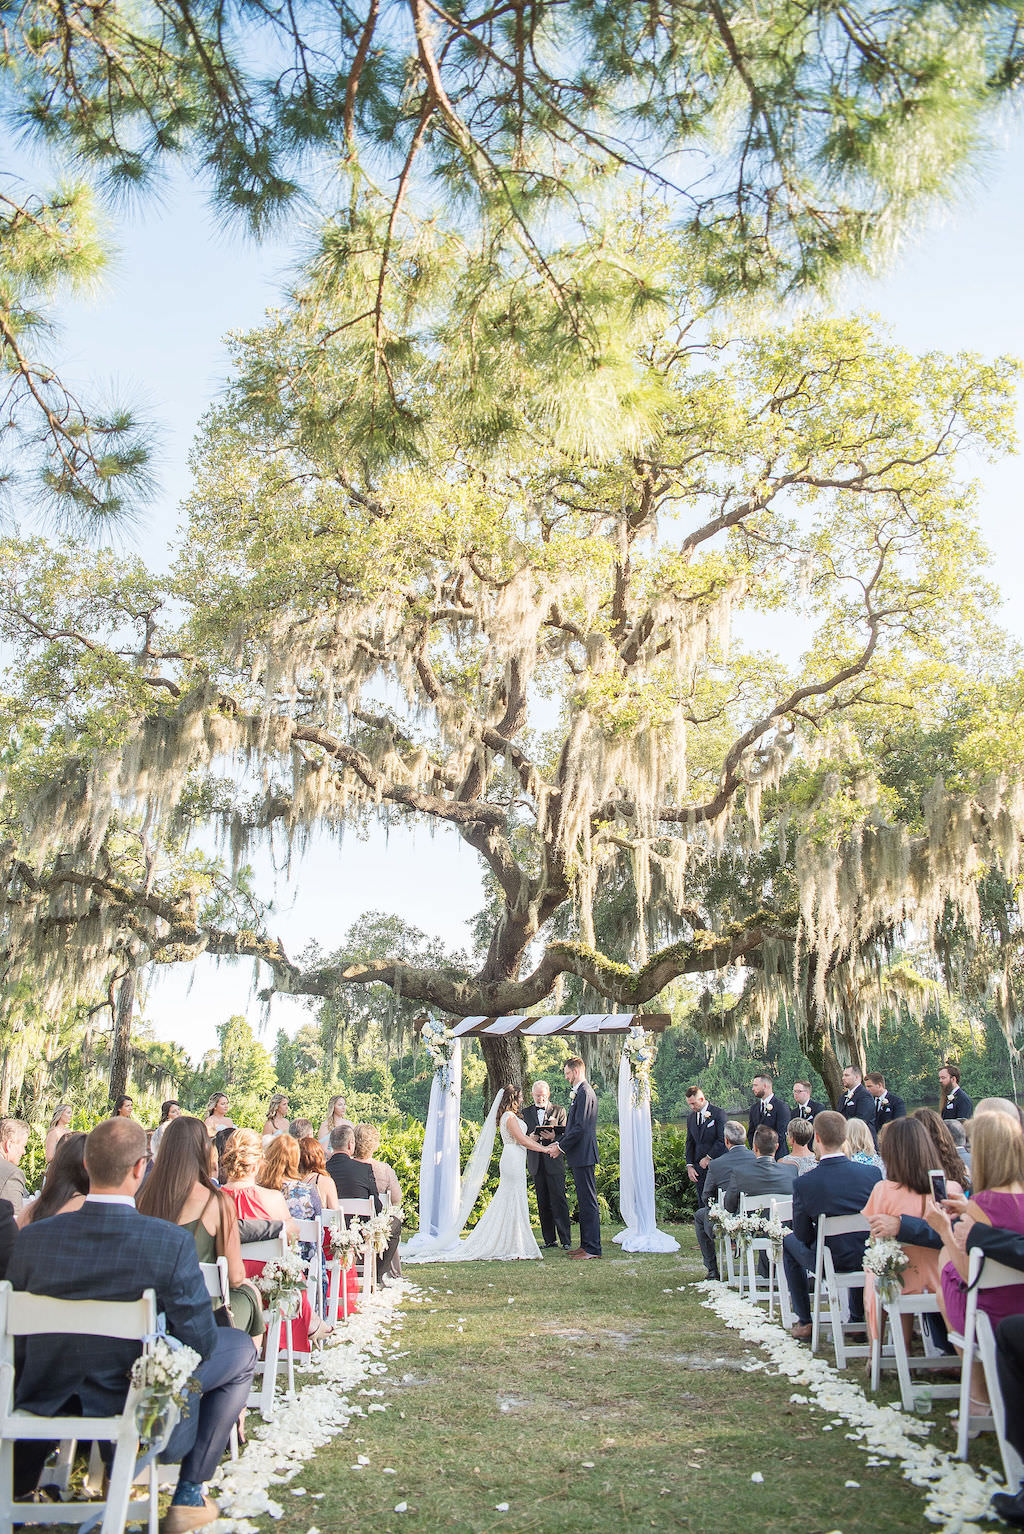 Florida Bride and Groom Exchanging Vows Under Wooden Arch with White Draping and Blue and White Flower Bouquets on Golf Course Wedding Ceremony Portrait | Tampa Bay Kristen Marie Photography | Innisbrook Golf & Spa Resort Wedding Venue